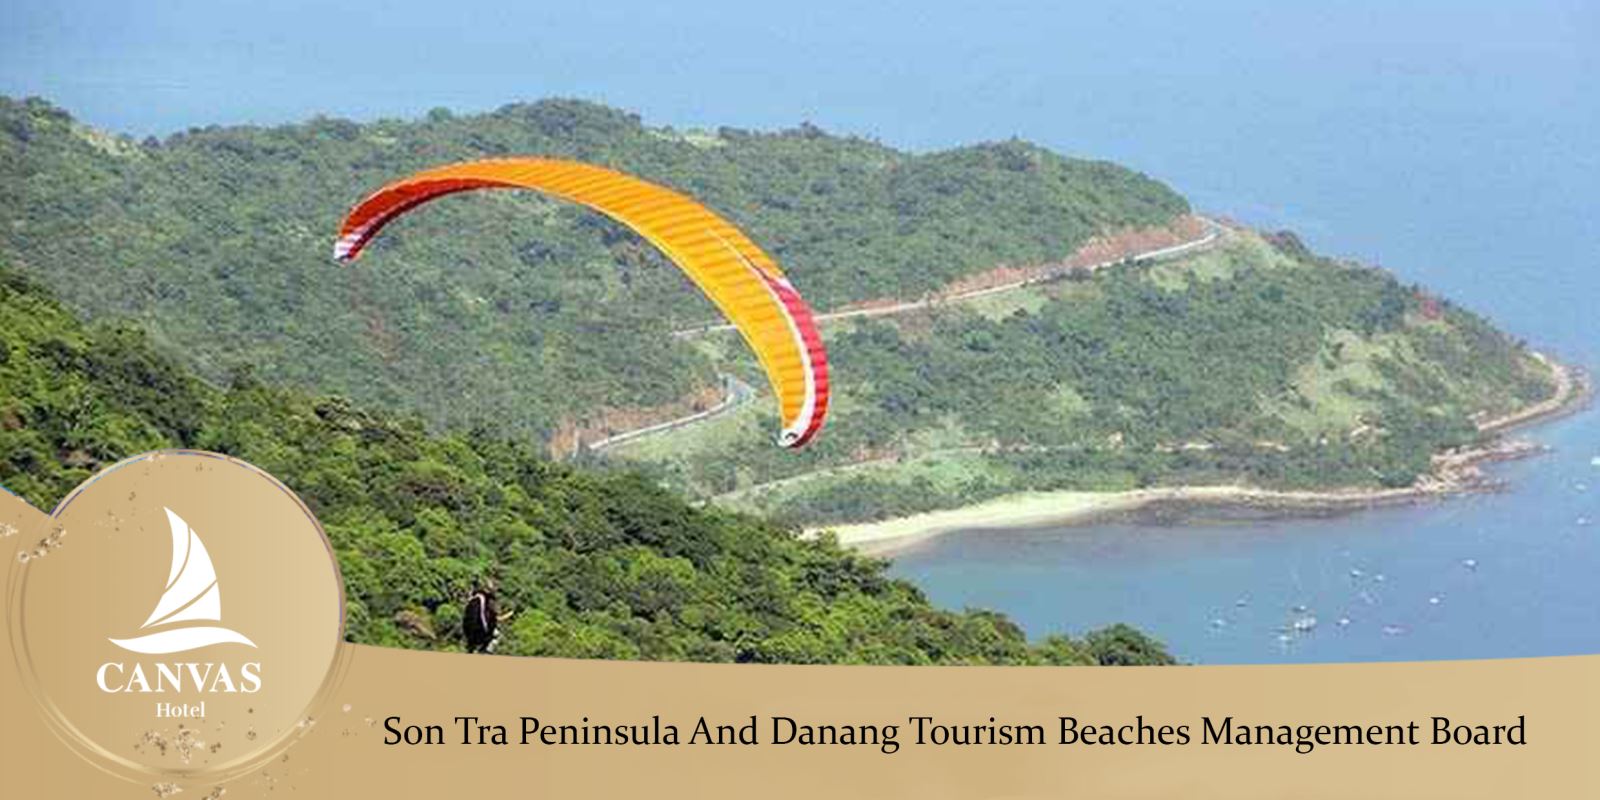 Son Tra Peninsula And Danang Tourism Beaches Management Board